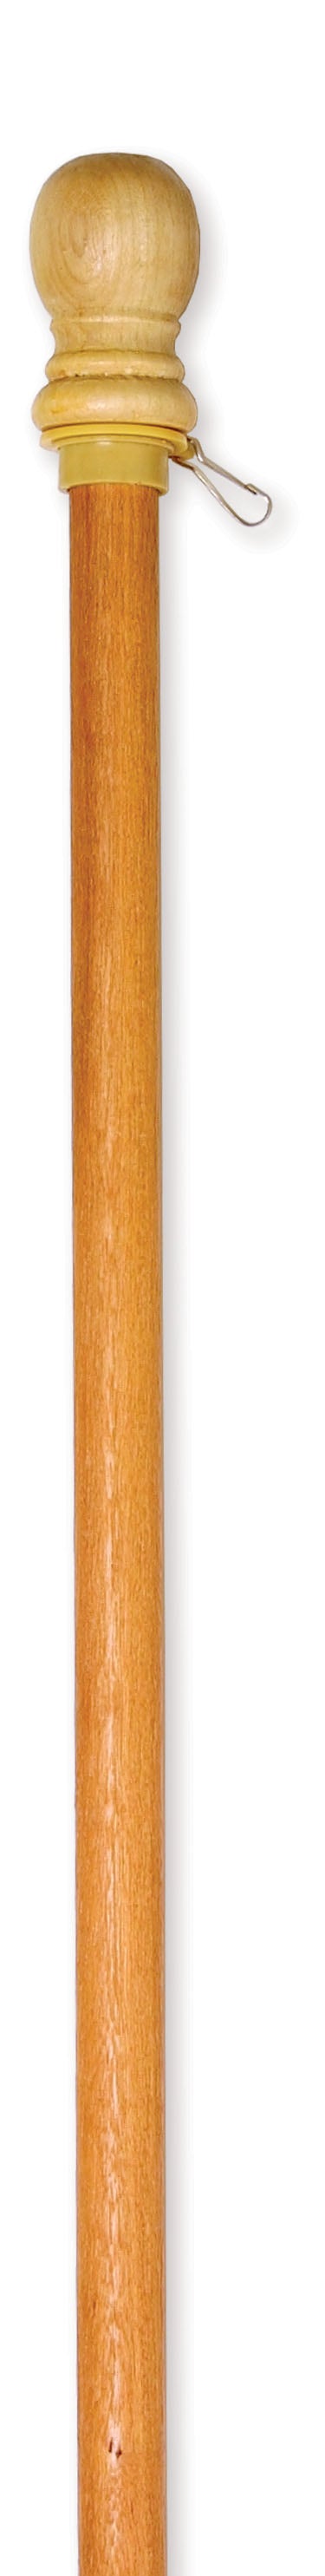 Classic Wooden Flag Pole With Ring